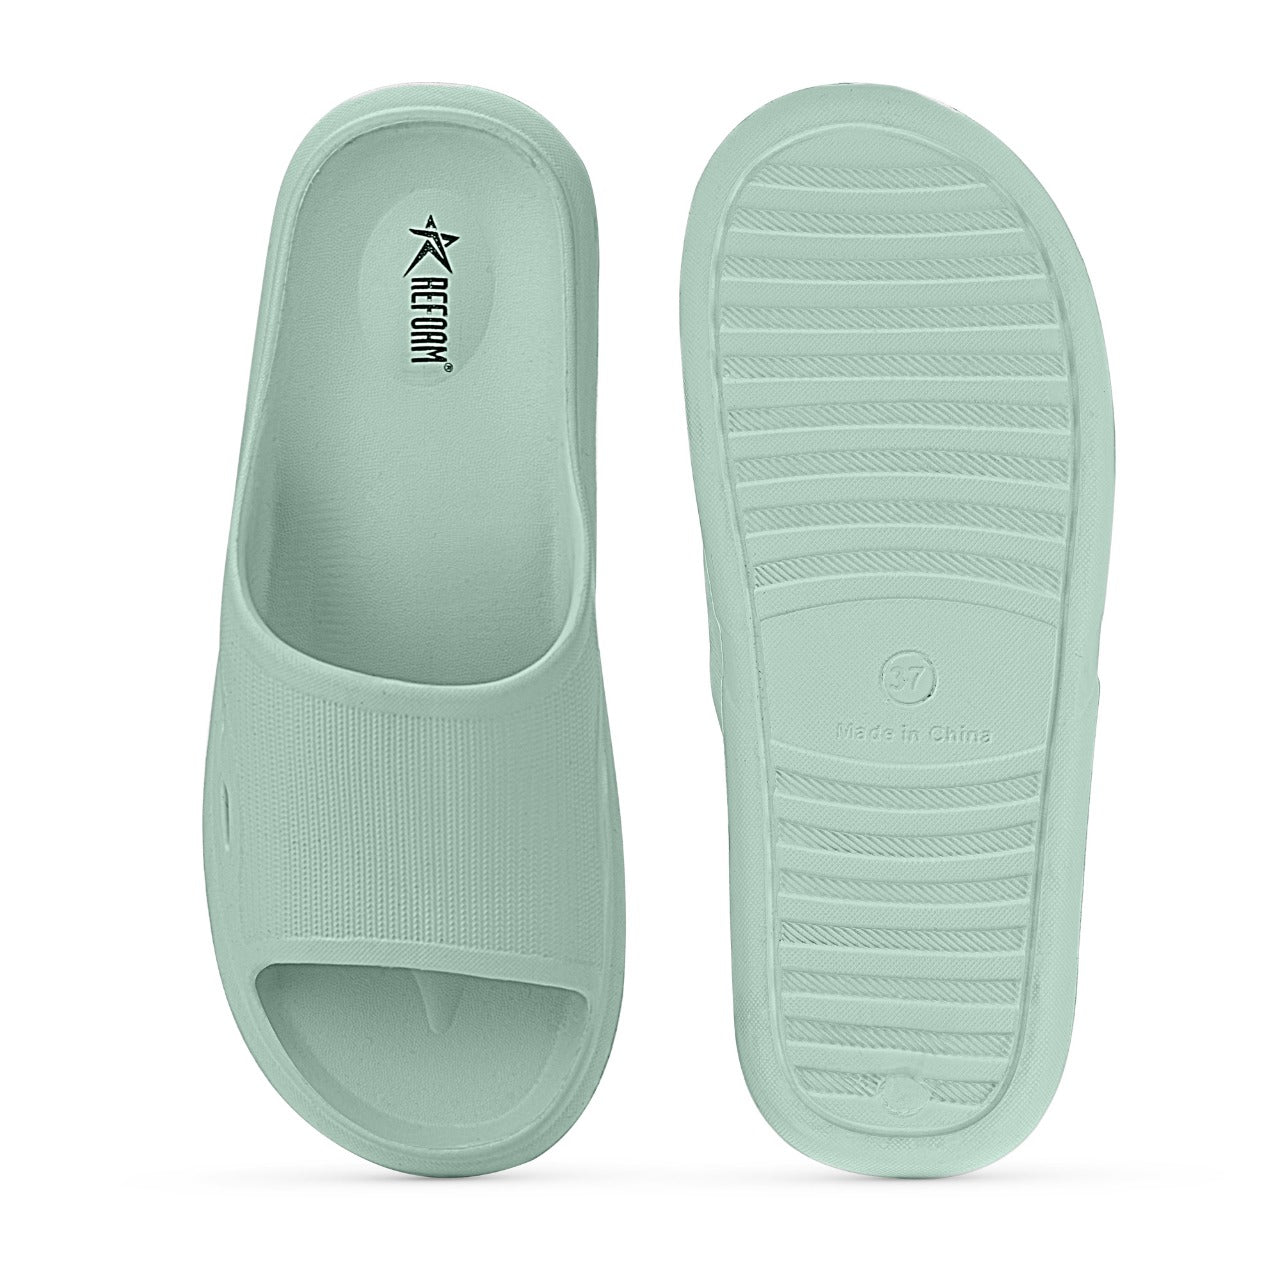 Green Solid Rubber Slip On Casual Slippers For Women